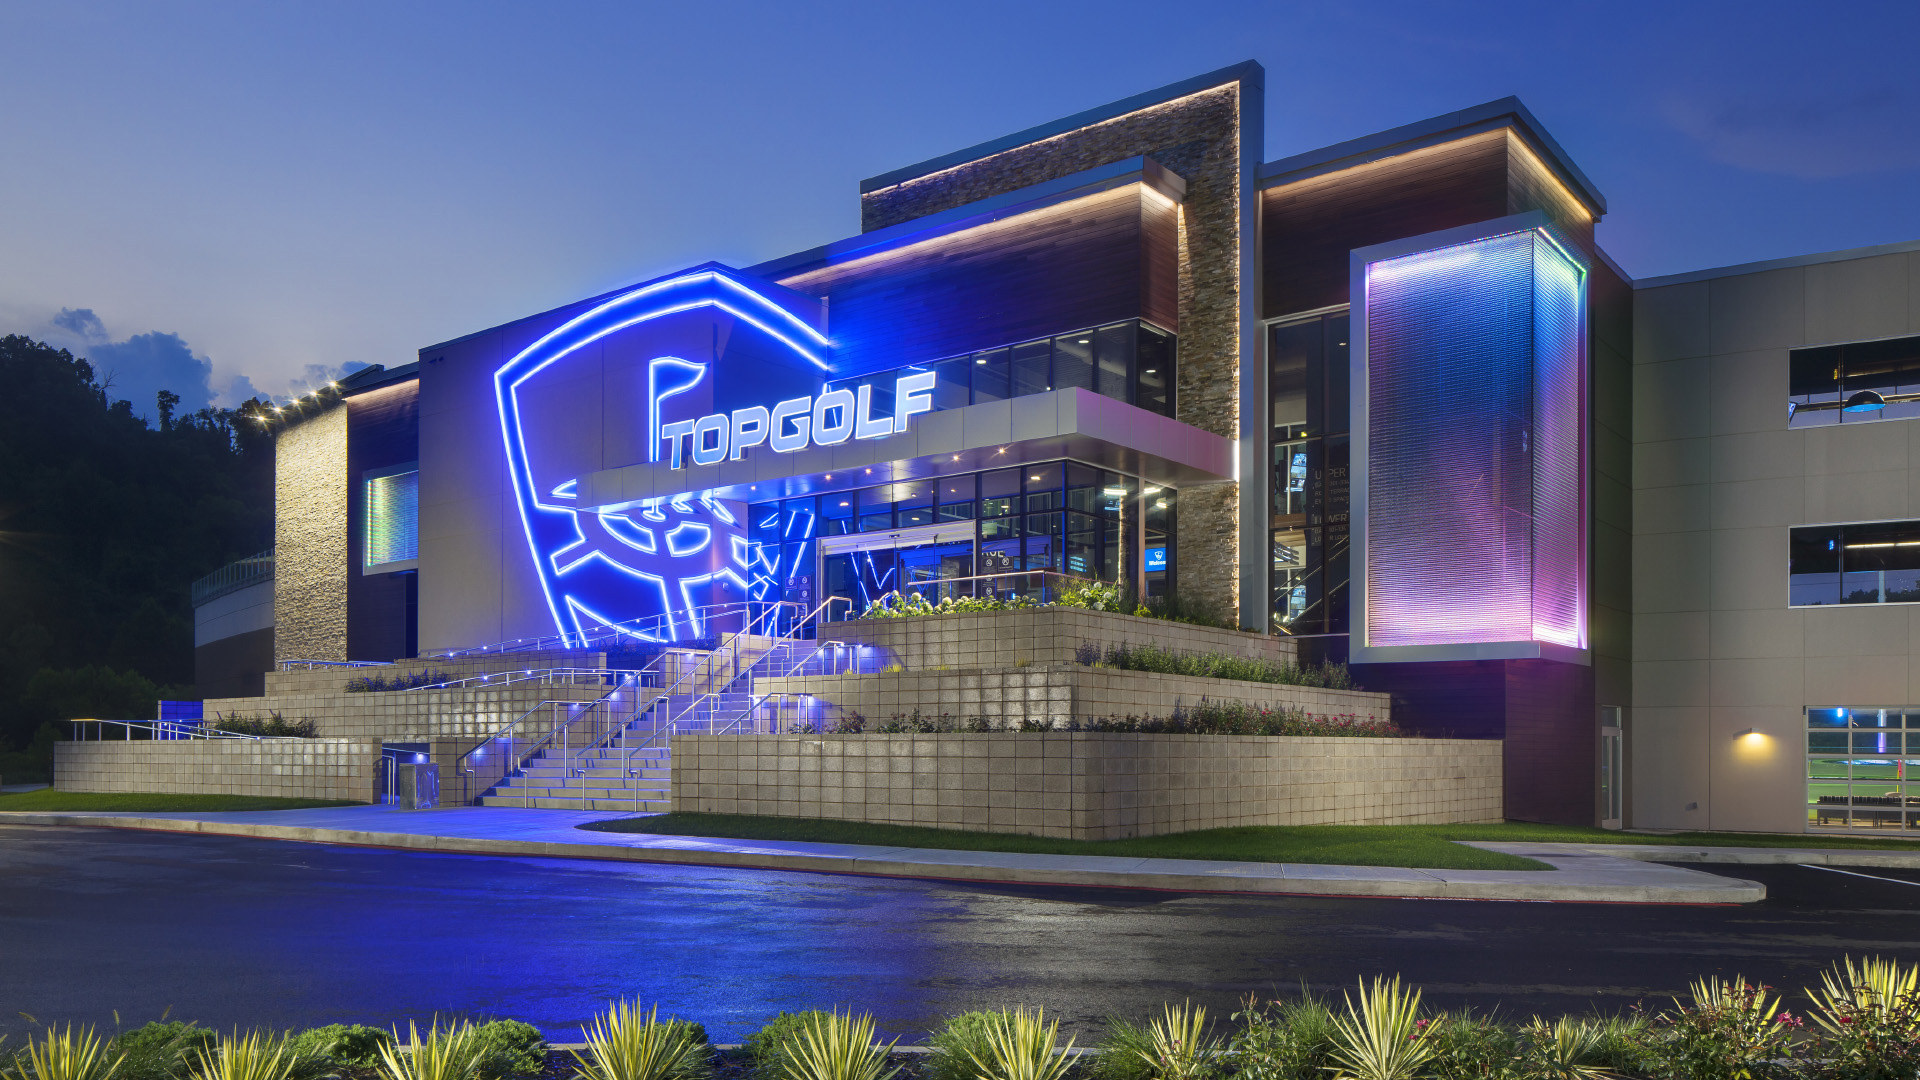 Exterior of Topgolf Pittsburgh